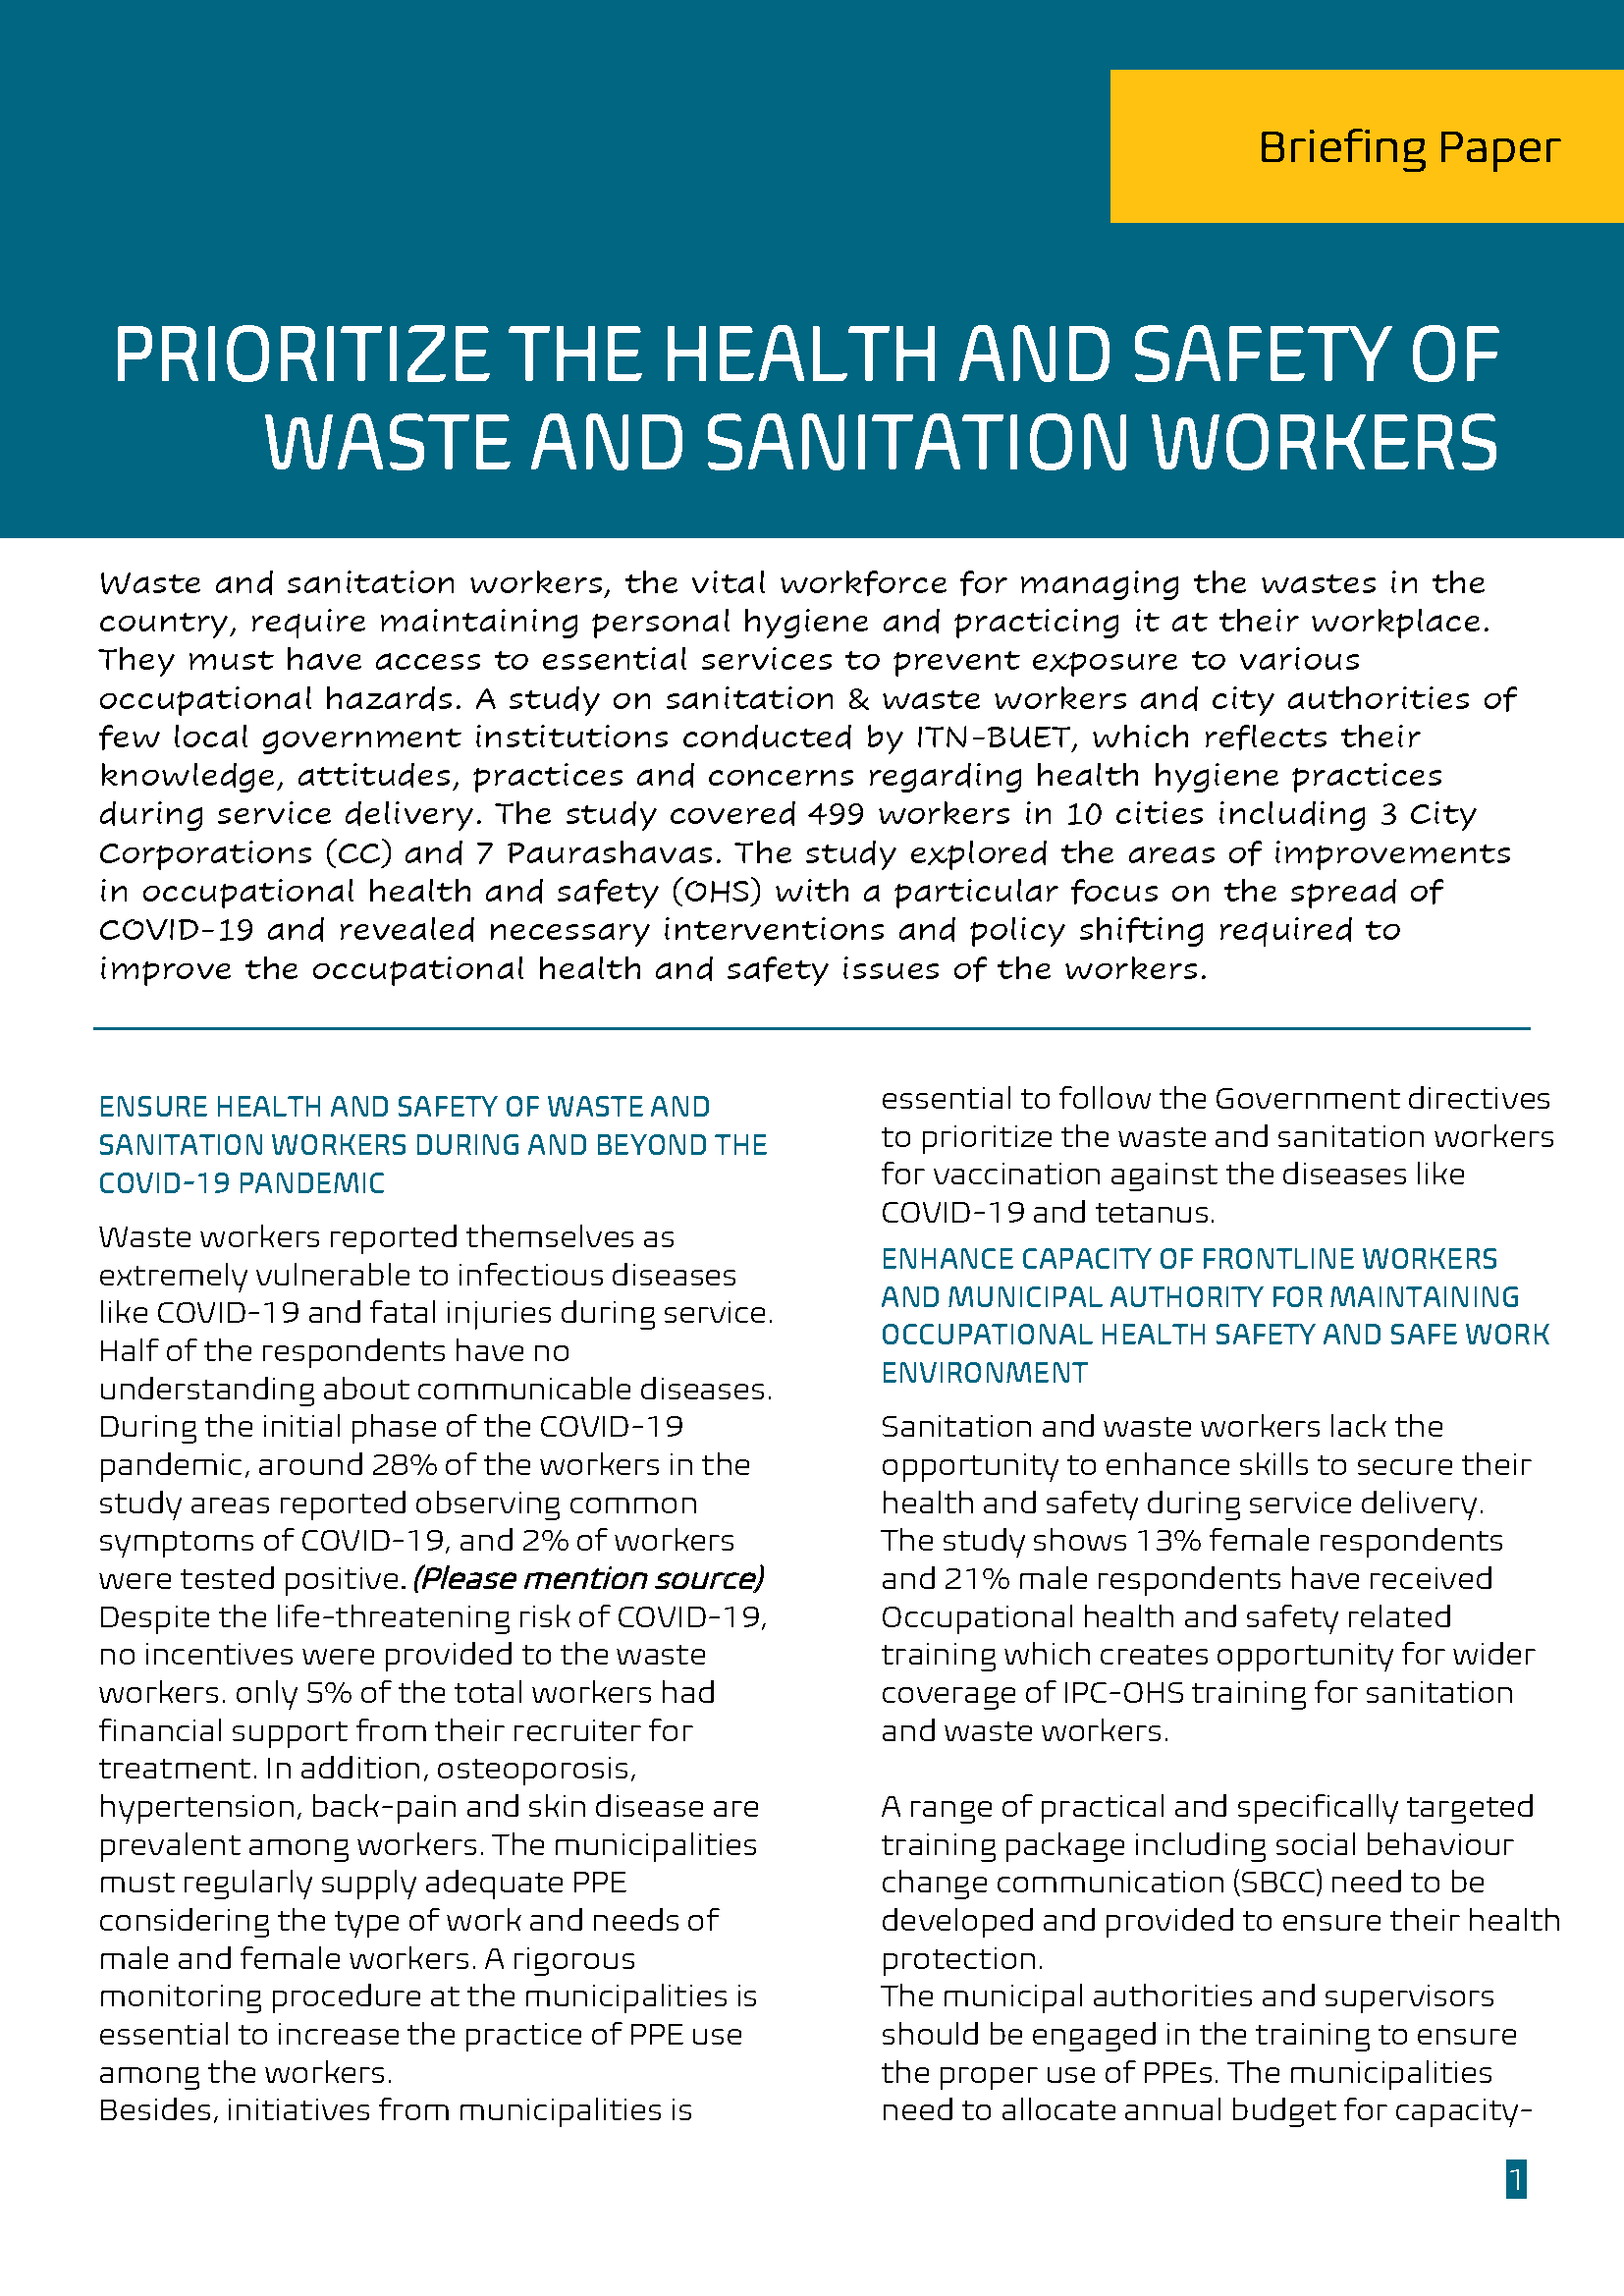 Prioritize the Health and Safety of Waste and Sanitation Workers-Briefing Paper